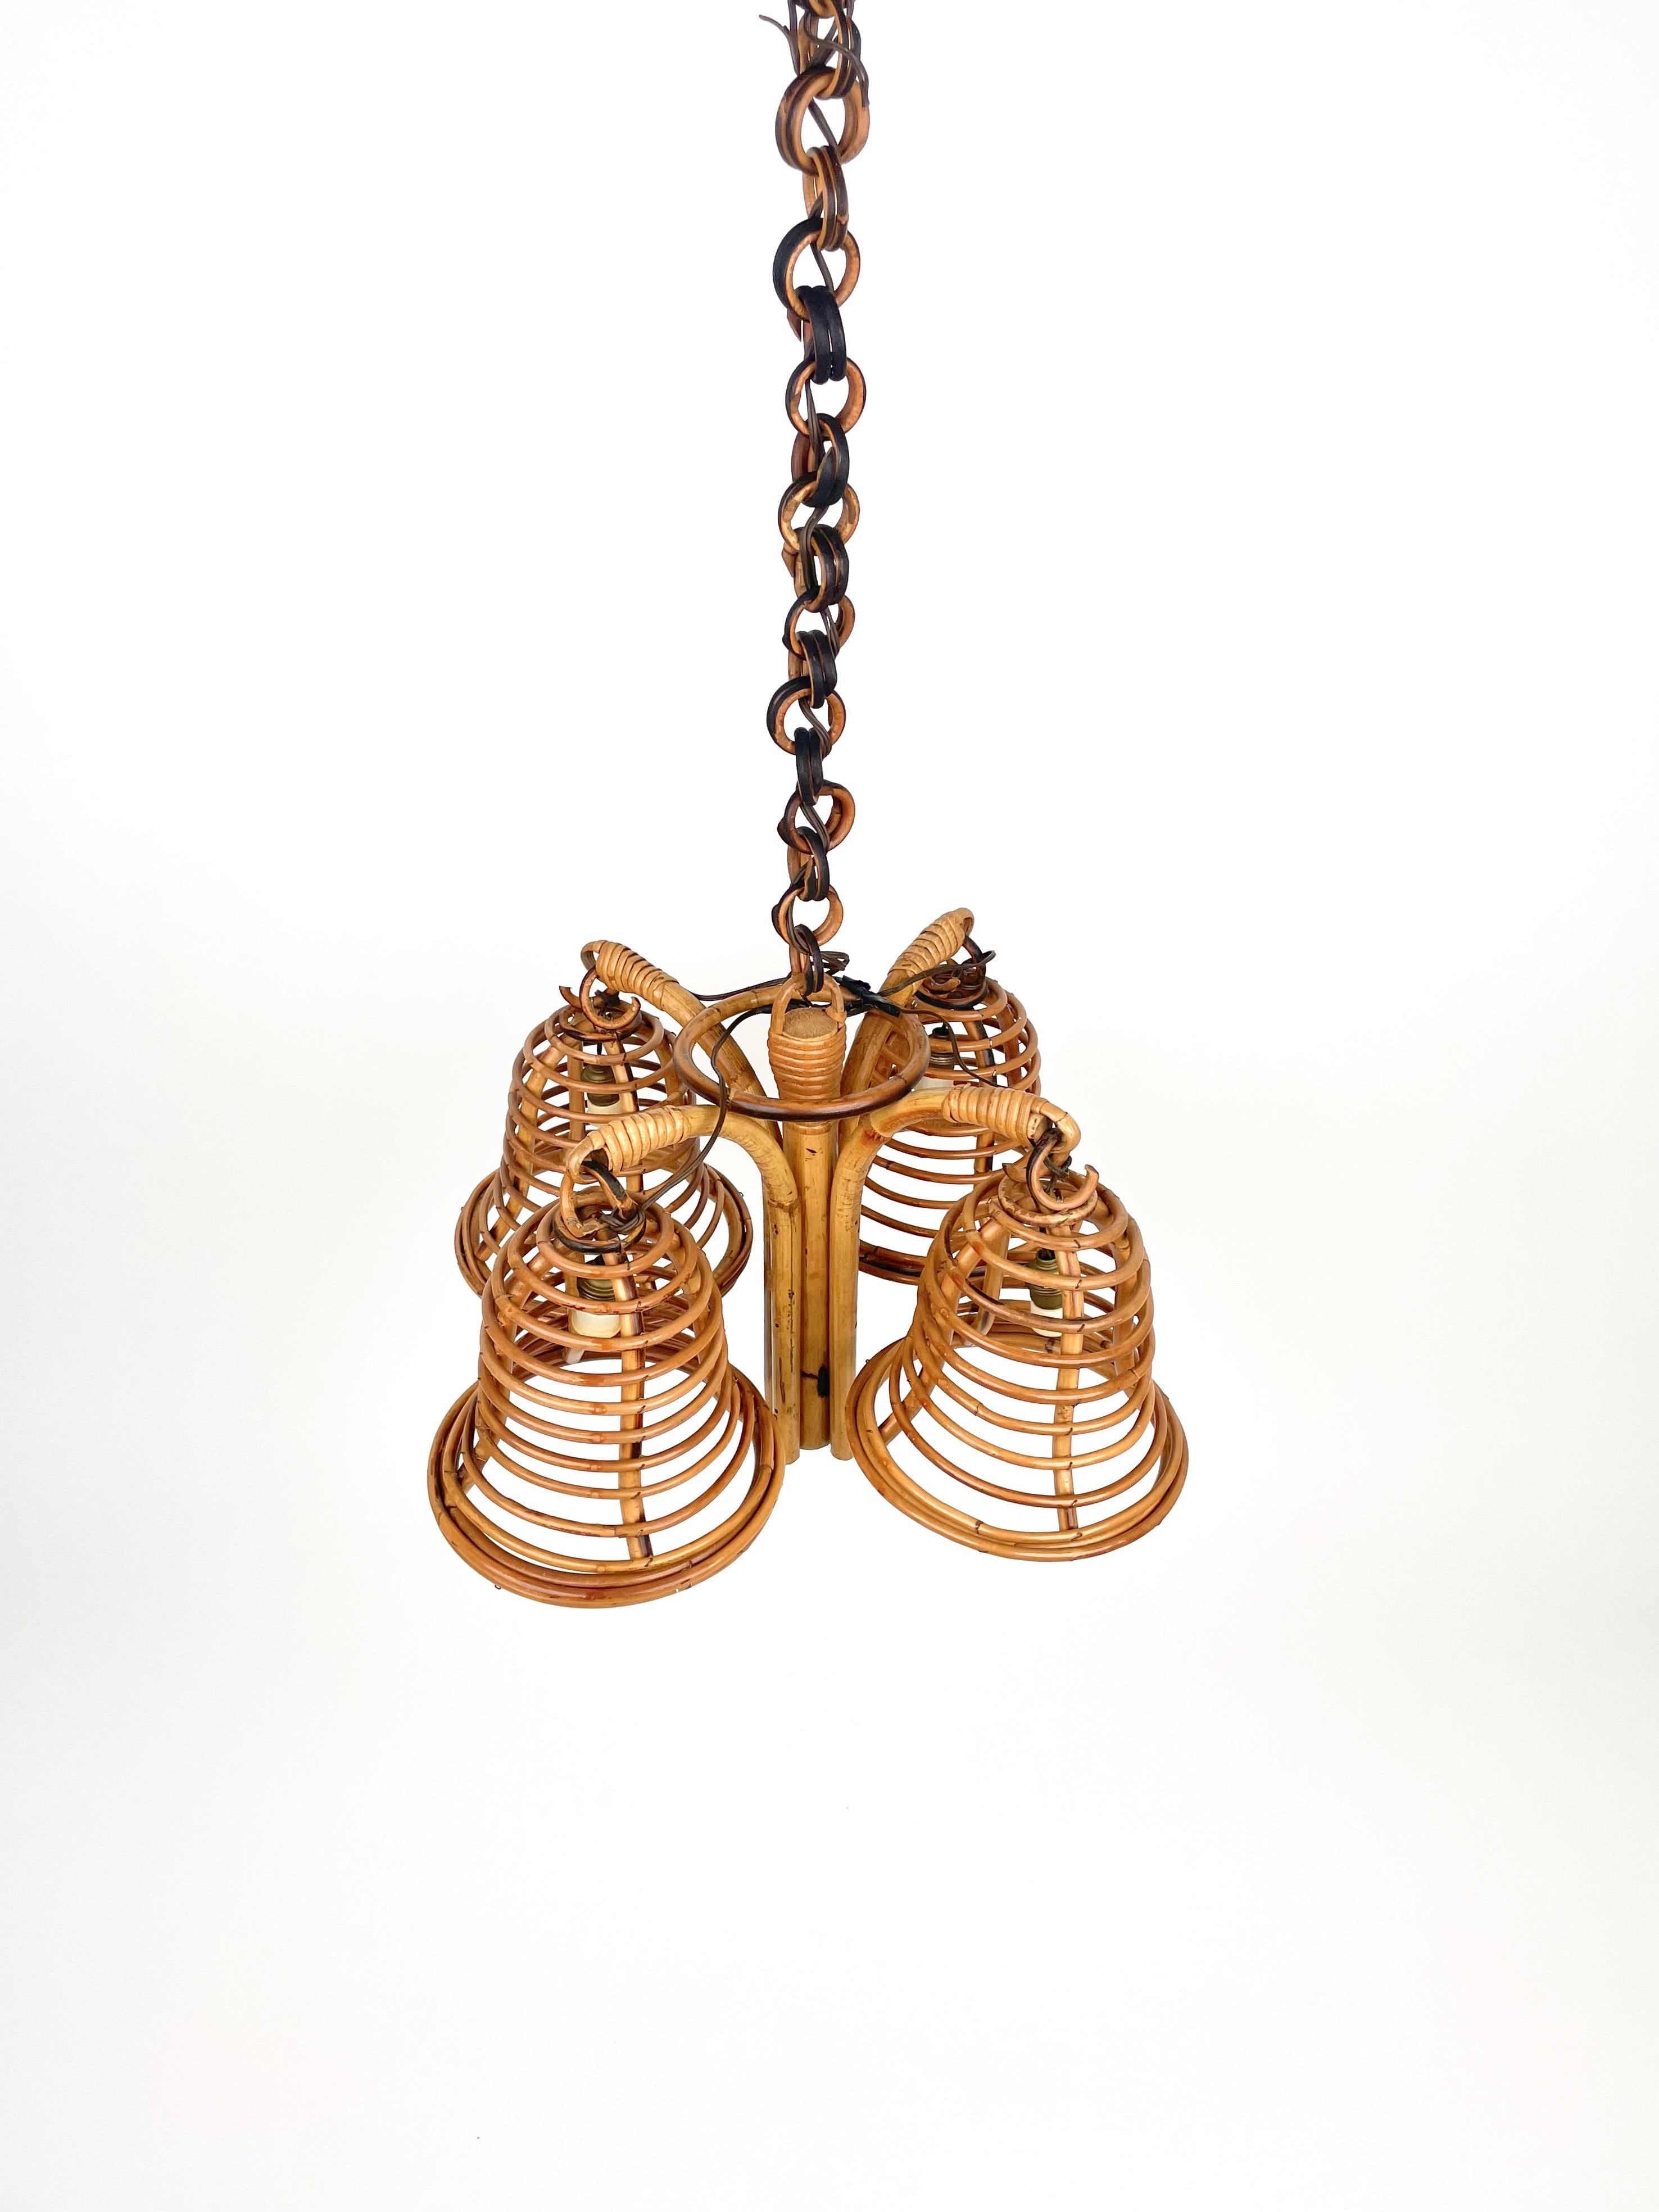 Rattan & Bamboo Chandelier Pendant Louis Sognot Style, Italy 1960s For Sale 3